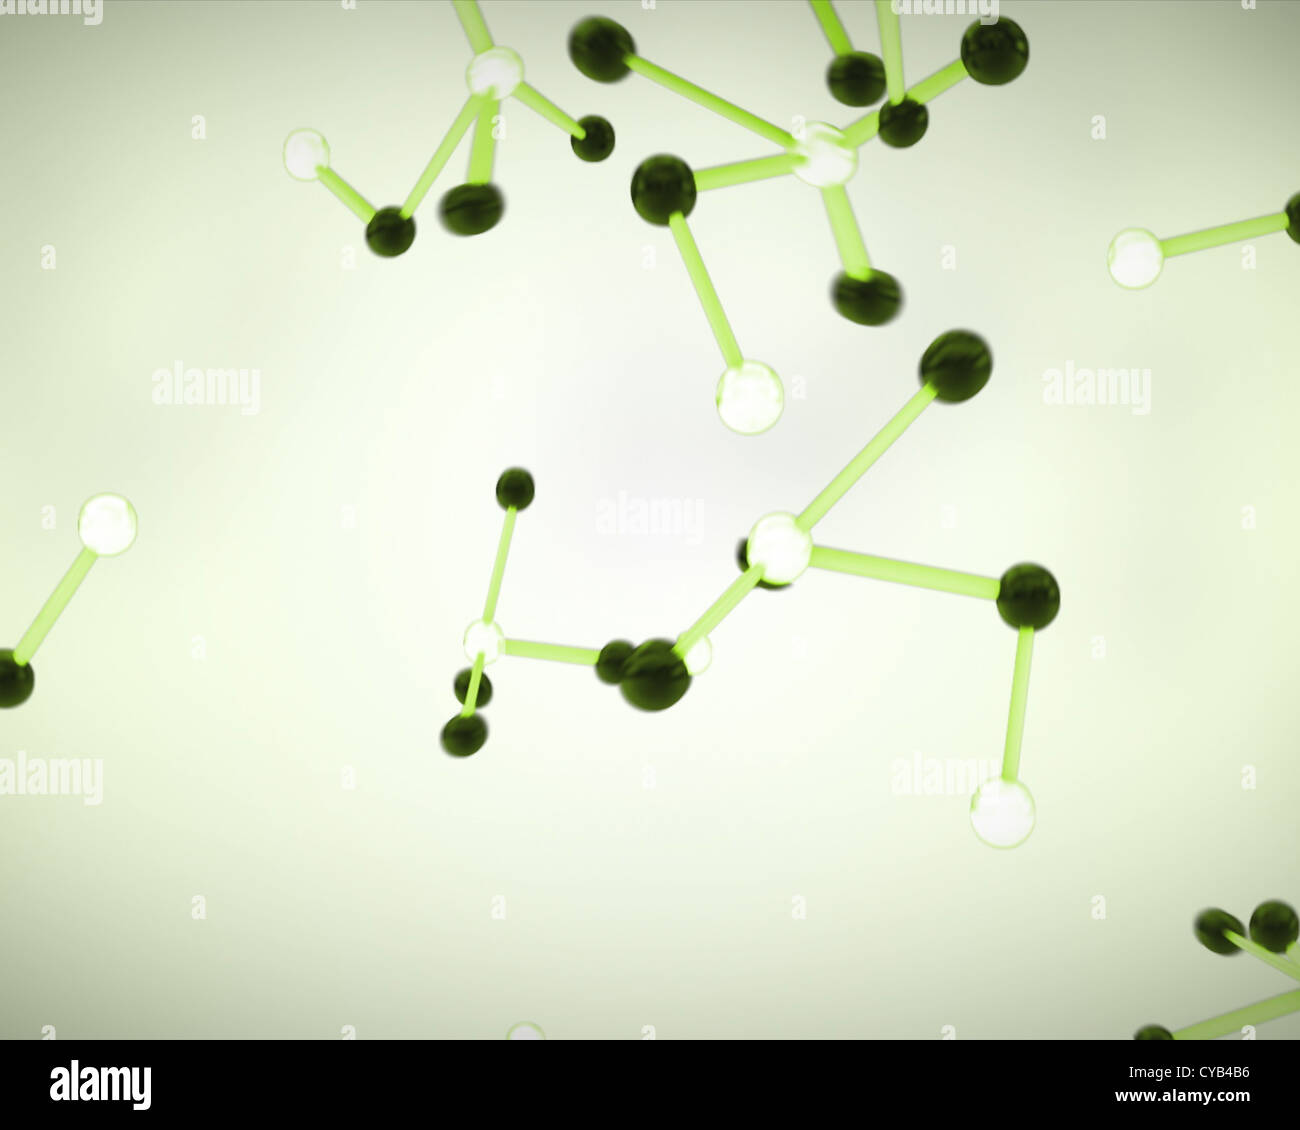 Black, white and green molecule cells Stock Photo